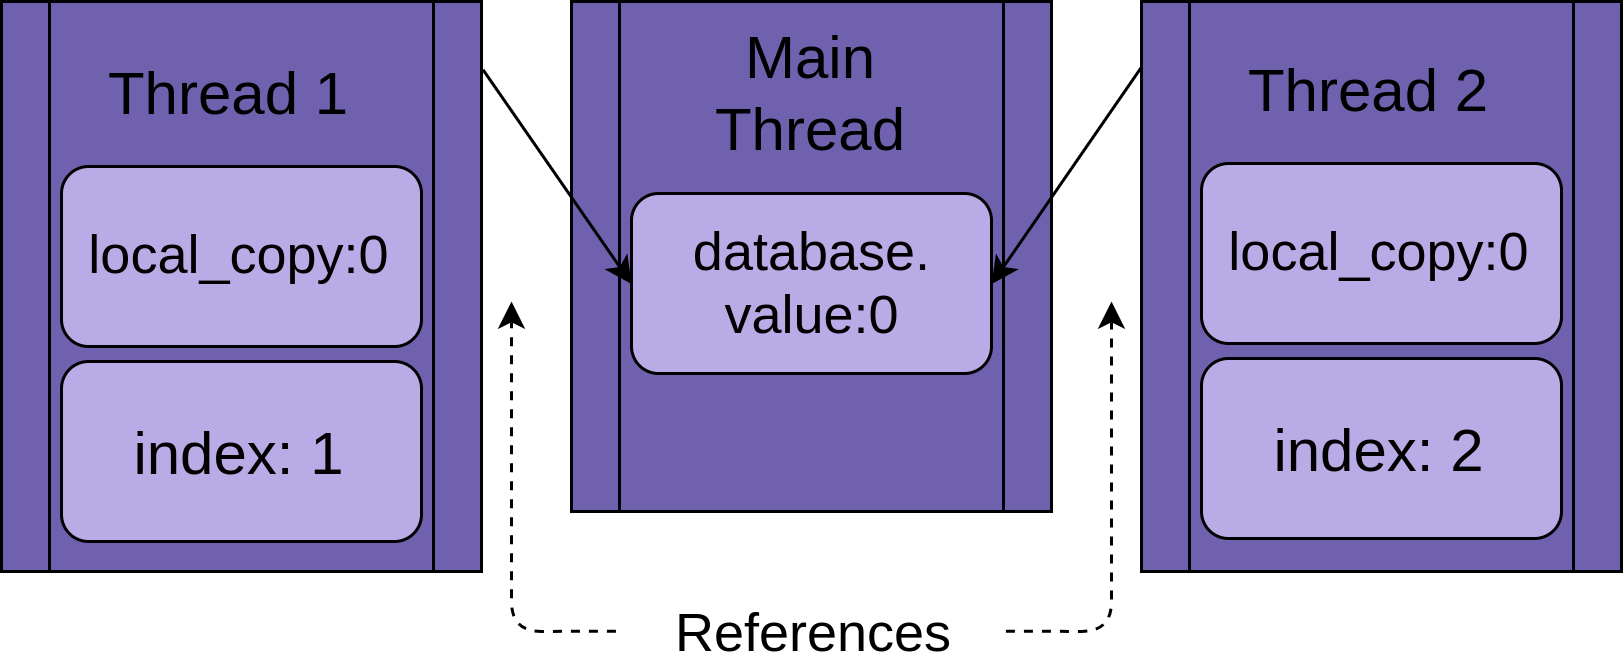 Thread 1 and Thread 2 use the same shared database.